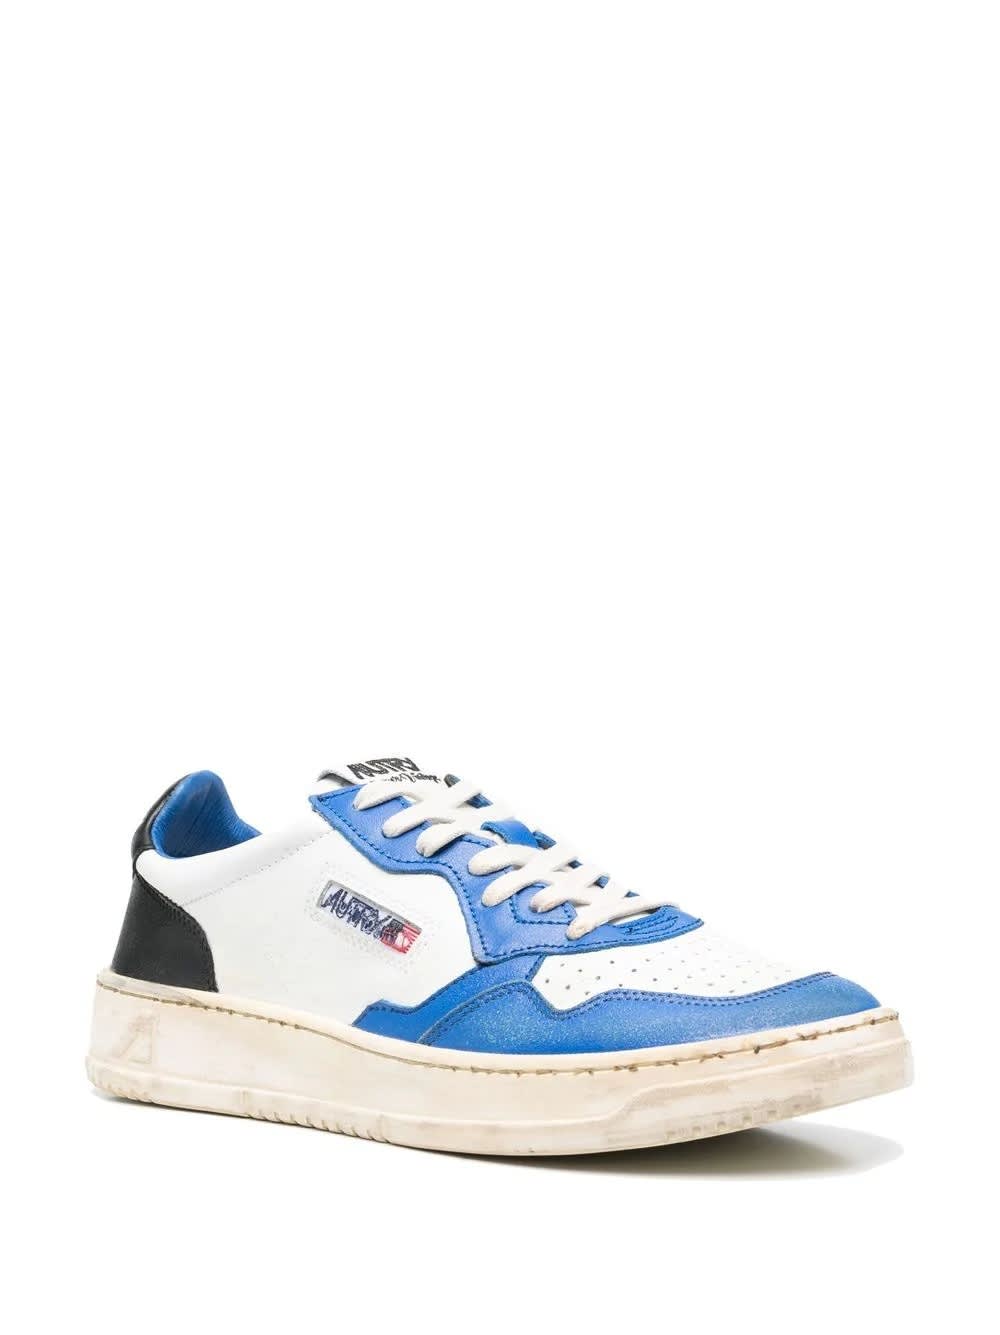 Shop Autry Super Vintage Medalist Low Sneakers In Blue, Black And White Leather